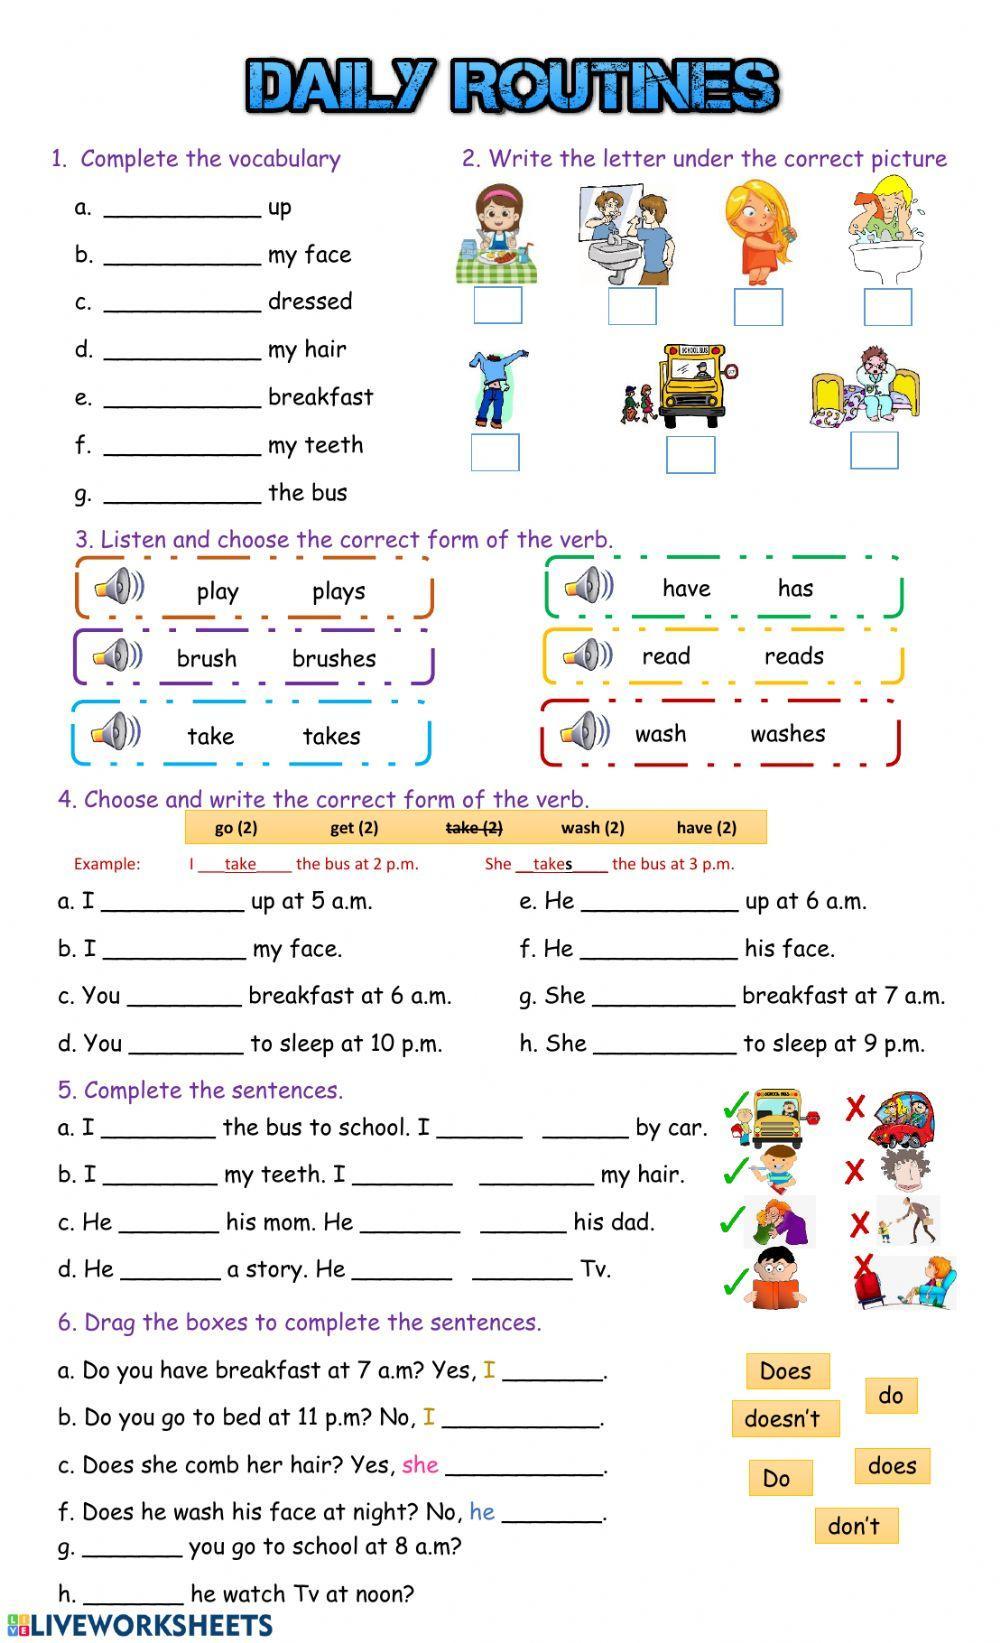 Routines exercises. Задания Daily Routine for Kids. Worksheet «the Daily Routine of the Queen» ответы на тесты. Vocabulary задания. Daily Routine задания.